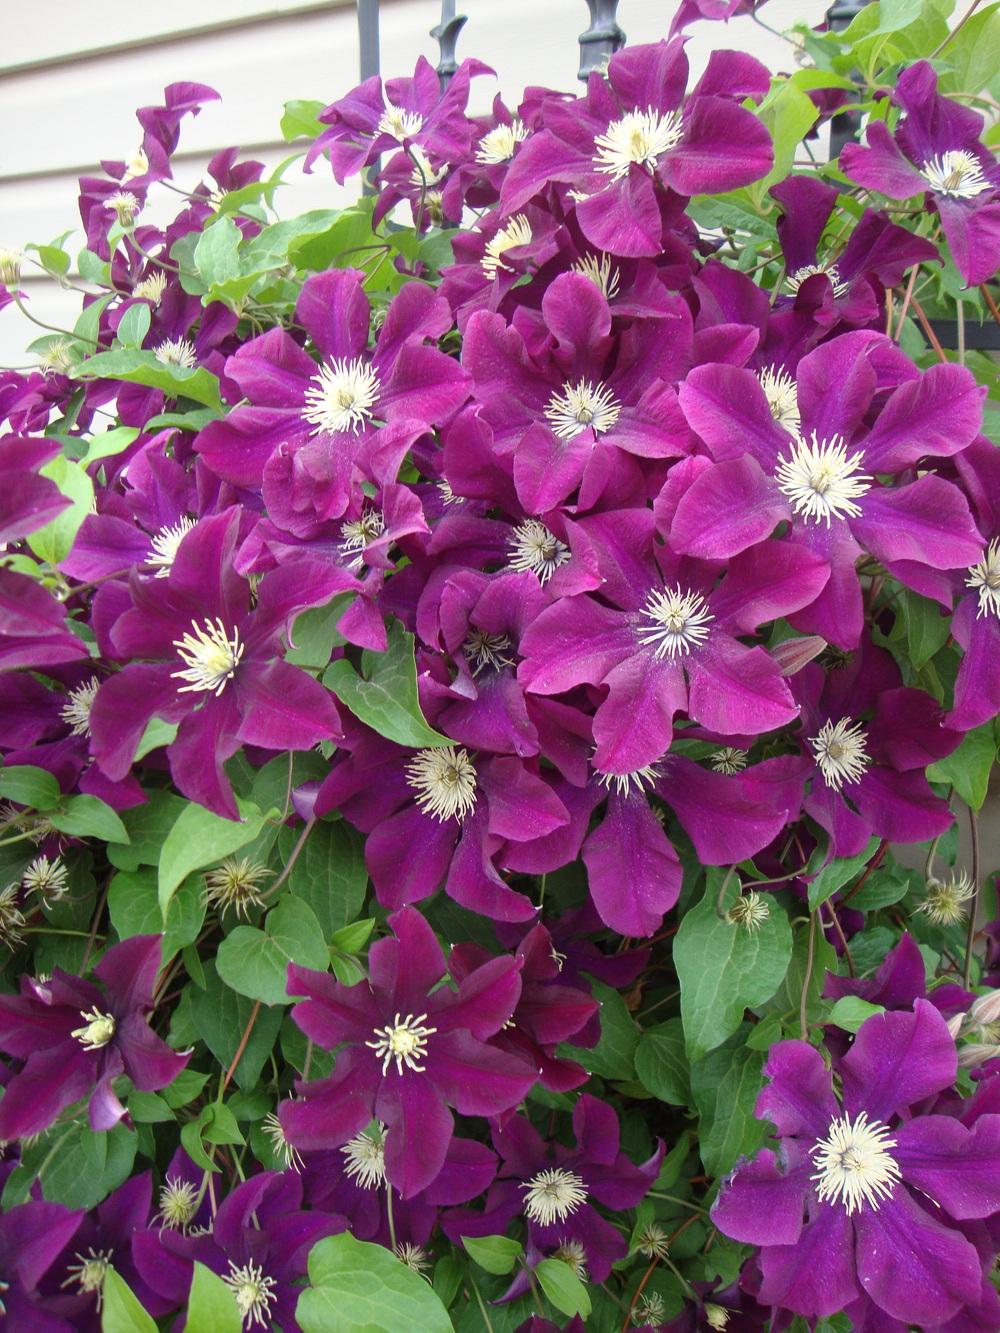 Photo of Clematis uploaded by Paul2032